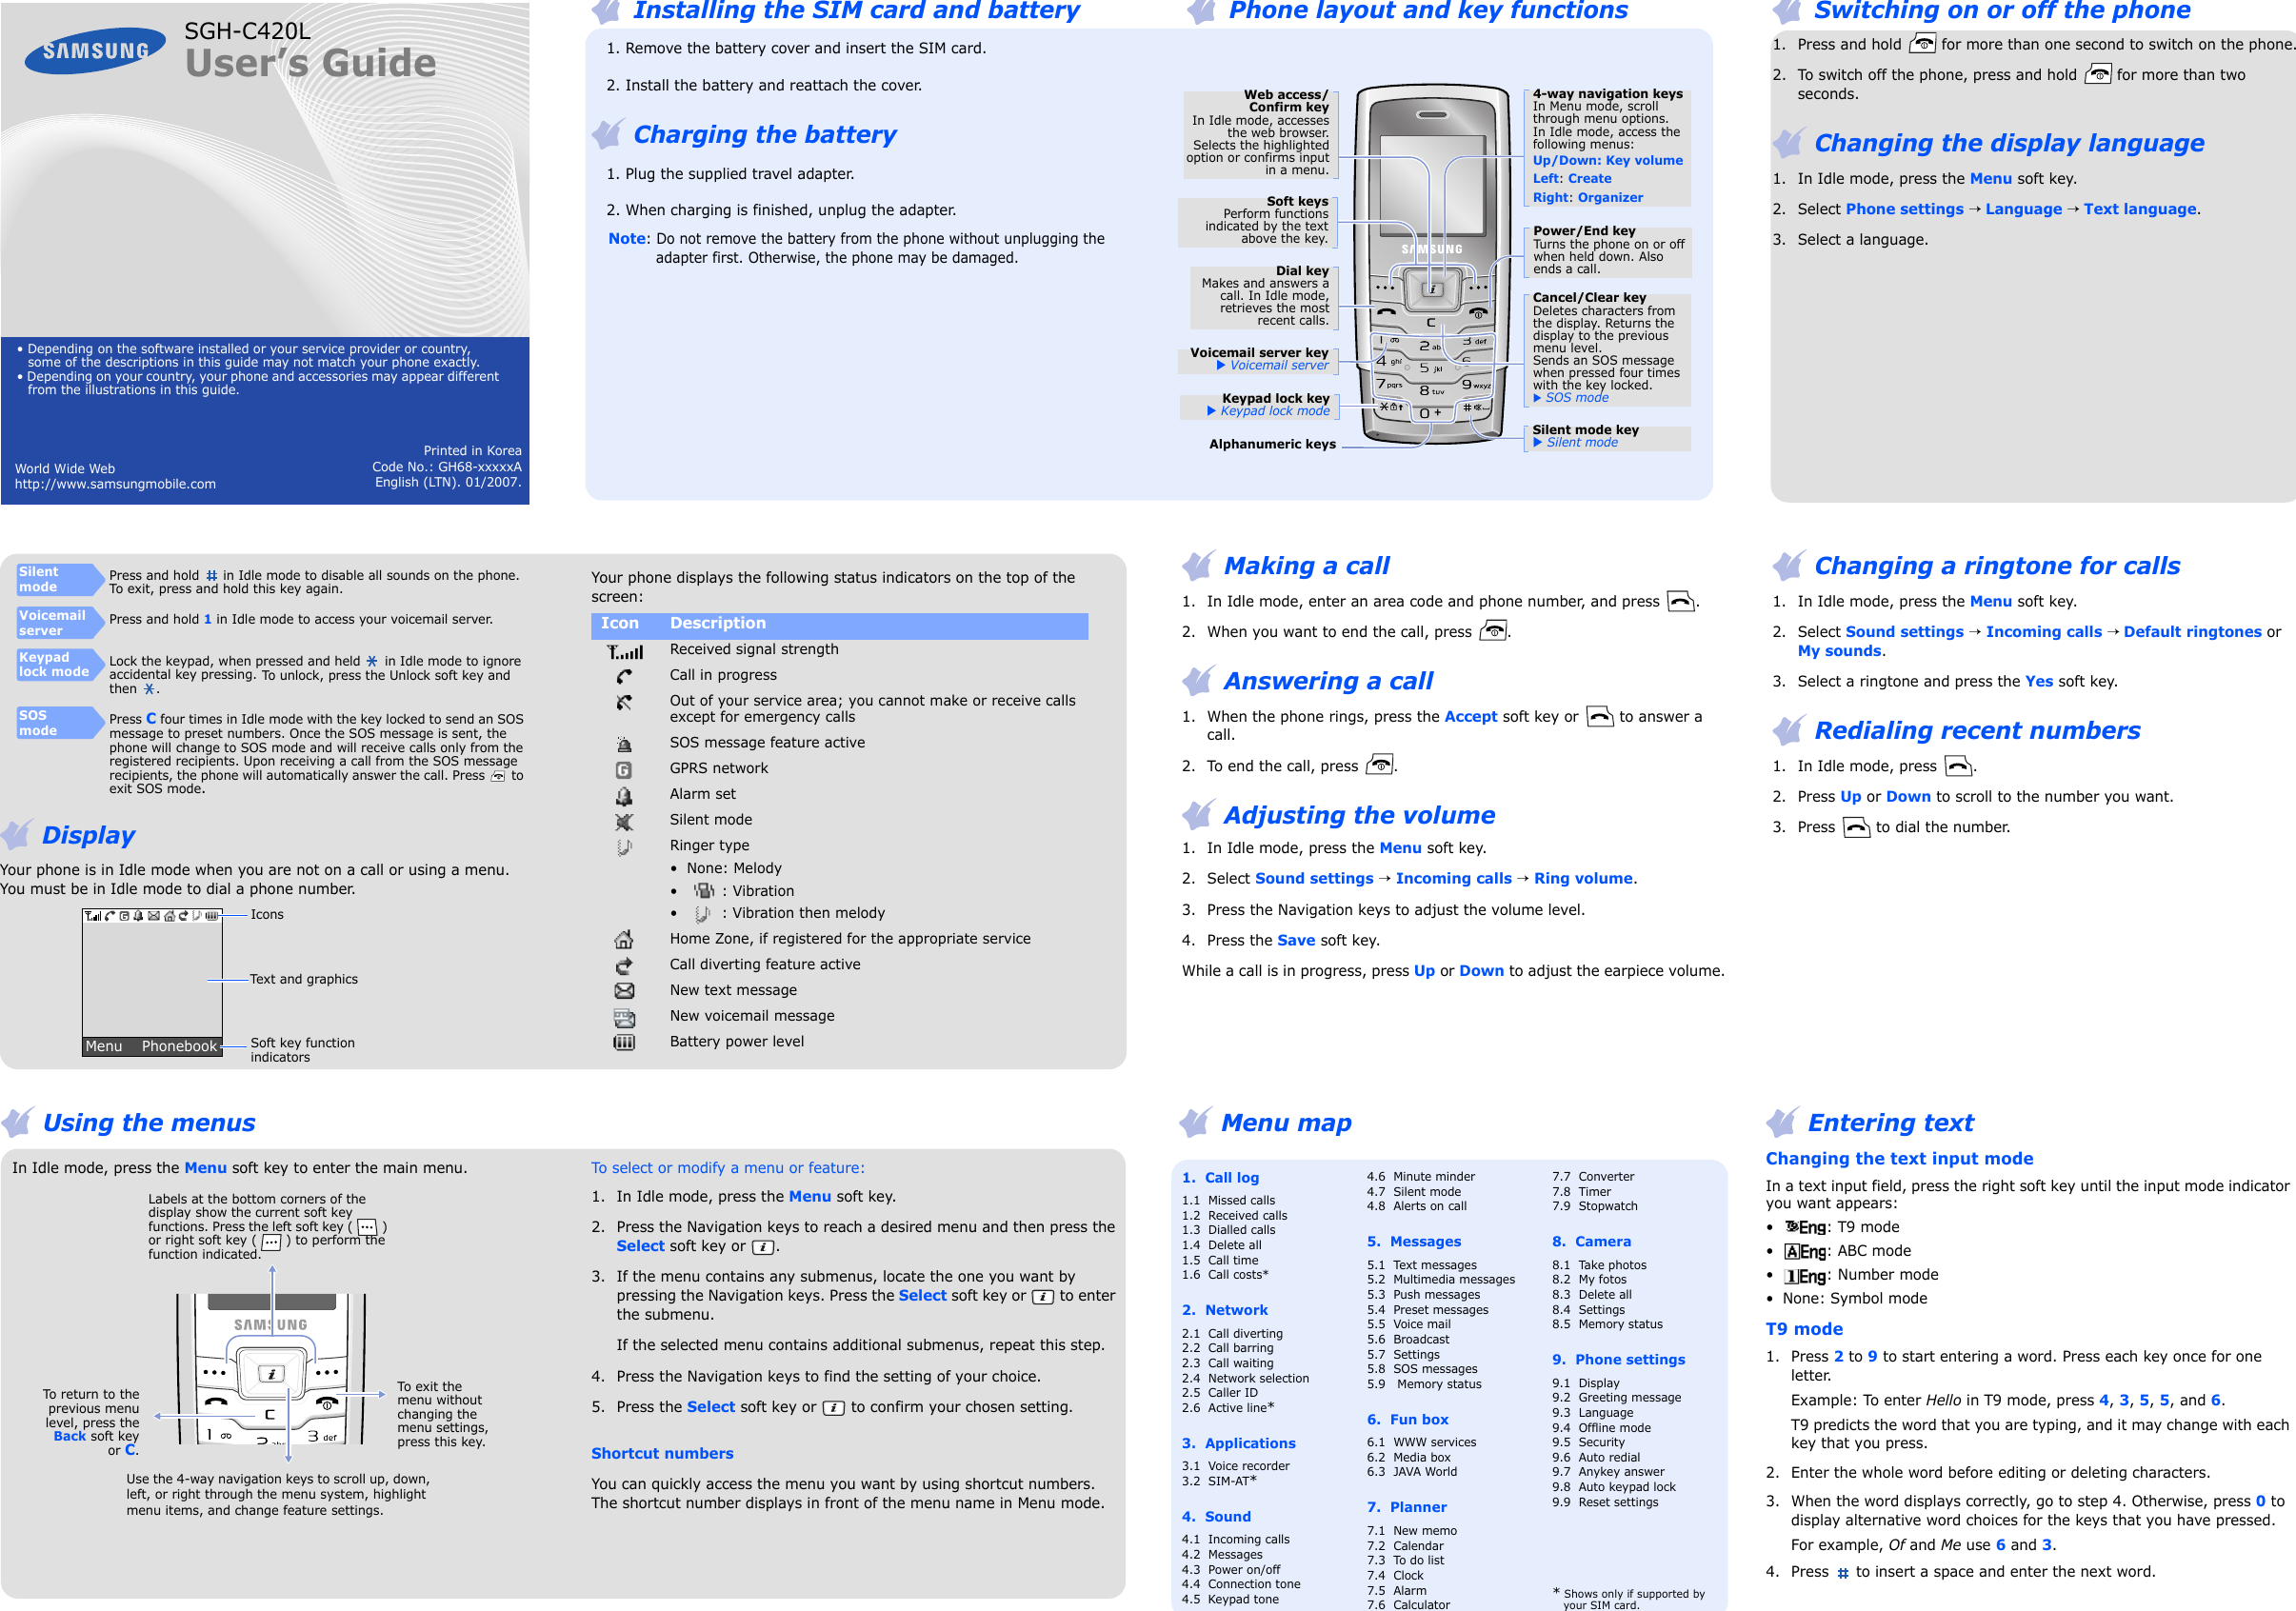 Printed in KoreaCode No.: GH68-xxxxxAEnglish (LTN). 01/2007.World Wide Web                                             http://www.samsungmobile.comSGH-C420LUser’s Guide• Depending on the software installed or your service provider or country, some of the descriptions in this guide may not match your phone exactly.• Depending on your country, your phone and accessories may appear different from the illustrations in this guide.1.  Call log1.1  Missed calls1.2  Received calls1.3  Dialled calls1.4  Delete all1.5  Call time1.6  Call costs*2.  Network 2.1  Call diverting2.2  Call barring2.3  Call waiting2.4  Network selection2.5  Caller ID2.6  Active line*3.  Applications3.1  Voice recorder3.2  SIM-AT*4.  Sound 4.1  Incoming calls4.2  Messages4.3  Power on/off4.4  Connection tone4.5  Keypad tone4.6  Minute minder4.7  Silent mode4.8  Alerts on call5.  Messages5.1  Text messages5.2  Multimedia messages5.3  Push messages 5.4  Preset messages5.5  Voice mail5.6  Broadcast5.7  Settings5.8  SOS messages5.9   Memory status6.  Fun box6.1  WWW services6.2  Media box6.3  JAVA World7.  Planner7.1  New memo  7.2  Calendar7.3  To do list7.4  Clock7.5  Alarm7.6  Calculator7.7  Converter7.8  Timer7.9  Stopwatch8.  Camera8.1  Take photos8.2  My fotos8.3  Delete all8.4  Settings8.5  Memory status9.  Phone settings9.1  Display9.2  Greeting message9.3  Language9.4  Offline mode9.5  Security9.6  Auto redial9.7  Anykey answer9.8  Auto keypad lock9.9  Reset settings* Shows only if supported by your SIM card. Switching on or off the phone 1. Press and hold   for more than one second to switch on the phone.2. To switch off the phone, press and hold   for more than two seconds. Changing the display language1. In Idle mode, press the Menu soft key.2. Select Phone settings → Language → Text language.3. Select a language. Installing the SIM card and battery   1. Remove the battery cover and insert the SIM card.   2. Install the battery and reattach the cover. Charging the battery   1. Plug the supplied travel adapter.   2. When charging is finished, unplug the adapter.Note: Do not remove the battery from the phone without unplugging the adapter first. Otherwise, the phone may be damaged. Phone layout and key functionsWeb access/Confirm keyIn Idle mode, accessesthe web browser.Selects the highlightedoption or confirms inputin a menu.Voicemail server key X Voicemail serverSoft keysPerform functionsindicated by the textabove the key.4-way navigation keysIn Menu mode, scroll through menu options.In Idle mode, access the following menus:Up/Down: Key volumeLeft: CreateRight: OrganizerPower/End keyTurns the phone on or off when held down. Also ends a call.Silent mode keyX Silent mode Alphanumeric keysDial keyMakes and answers acall. In Idle mode,retrieves the mostrecent calls.Cancel/Clear keyDeletes characters from the display. Returns the display to the previous menu level. Sends an SOS message when pressed four times with the key locked.X SOS modeKeypad lock key X Keypad lock mode Changing a ringtone for calls1. In Idle mode, press the Menu soft key.2. Select Sound settings → Incoming calls → Default ringtones or My sounds. 3. Select a ringtone and press the Yes soft key. Redialing recent numbers1. In Idle mode, press  .2. Press Up or Down to scroll to the number you want.3. Press   to dial the number.  Using the menusIn Idle mode, press the Menu soft key to enter the main menu.Use the 4-way navigation keys to scroll up, down, left, or right through the menu system, highlight menu items, and change feature settings.To exit the menu without changing the menu settings, press this key.Labels at the bottom corners of the display show the current soft key functions. Press the left soft key ( ) or right soft key ( ) to perform the function indicated.To return to theprevious menulevel, press theBack soft keyor C.To select or modify a menu or feature:1. In Idle mode, press the Menu soft key.2. Press the Navigation keys to reach a desired menu and then press the Select soft key or  .3. If the menu contains any submenus, locate the one you want by pressing the Navigation keys. Press the Select soft key or   to enter the submenu.If the selected menu contains additional submenus, repeat this step.4. Press the Navigation keys to find the setting of your choice.5. Press the Select soft key or   to confirm your chosen setting.Shortcut numbersYou can quickly access the menu you want by using shortcut numbers. The shortcut number displays in front of the menu name in Menu mode. Making a call1. In Idle mode, enter an area code and phone number, and press  . 2. When you want to end the call, press  . Answering a call1. When the phone rings, press the Accept soft key or   to answer a call.2. To end the call, press  . Adjusting the volume1. In Idle mode, press the Menu soft key.2. Select Sound settings → Incoming calls → Ring volume. 3. Press the Navigation keys to adjust the volume level.4. Press the Save soft key. While a call is in progress, press Up or Down to adjust the earpiece volume.Your phone displays the following status indicators on the top of the screen:Icon Description Received signal strengthCall in progressOut of your service area; you cannot make or receive calls except for emergency callsSOS message feature activeGPRS networkAlarm setSilent modeRinger type•None: Melody•: Vibration• : Vibration then melodyHome Zone, if registered for the appropriate serviceCall diverting feature activeNew text messageNew voicemail messageBattery power level Menu map  Entering textChanging the text input modeIn a text input field, press the right soft key until the input mode indicator you want appears: •: T9 mode•: ABC mode• : Number mode• None: Symbol modeT9 mode1. Press 2 to 9 to start entering a word. Press each key once for one letter. Example: To enter Hello in T9 mode, press 4, 3, 5, 5, and 6.T9 predicts the word that you are typing, and it may change with each key that you press.2. Enter the whole word before editing or deleting characters.3. When the word displays correctly, go to step 4. Otherwise, press 0 to display alternative word choices for the keys that you have pressed.For example, Of and Me use 6 and 3.4. Press   to insert a space and enter the next word. DisplayYour phone is in Idle mode when you are not on a call or using a menu. You must be in Idle mode to dial a phone number.SilentmodePress and hold  in Idle mode to disable all sounds on the phone. To exit, press and hold this key again.Voicemail serverPress and hold 1 in Idle mode to access your voicemail server. Keypad lock modeLock the keypad, when pressed and held  in Idle mode to ignore accidental key pressing. To unlock, press the Unlock soft key and then .SOSmodePress C four times in Idle mode with the key locked to send an SOS message to preset numbers. Once the SOS message is sent, the phone will change to SOS mode and will receive calls only from the registered recipients. Upon receiving a call from the SOS message recipients, the phone will automatically answer the call. Press  to exit SOS mode.Text and graphicsSoft key function indicatorsMenu    PhonebookIcons